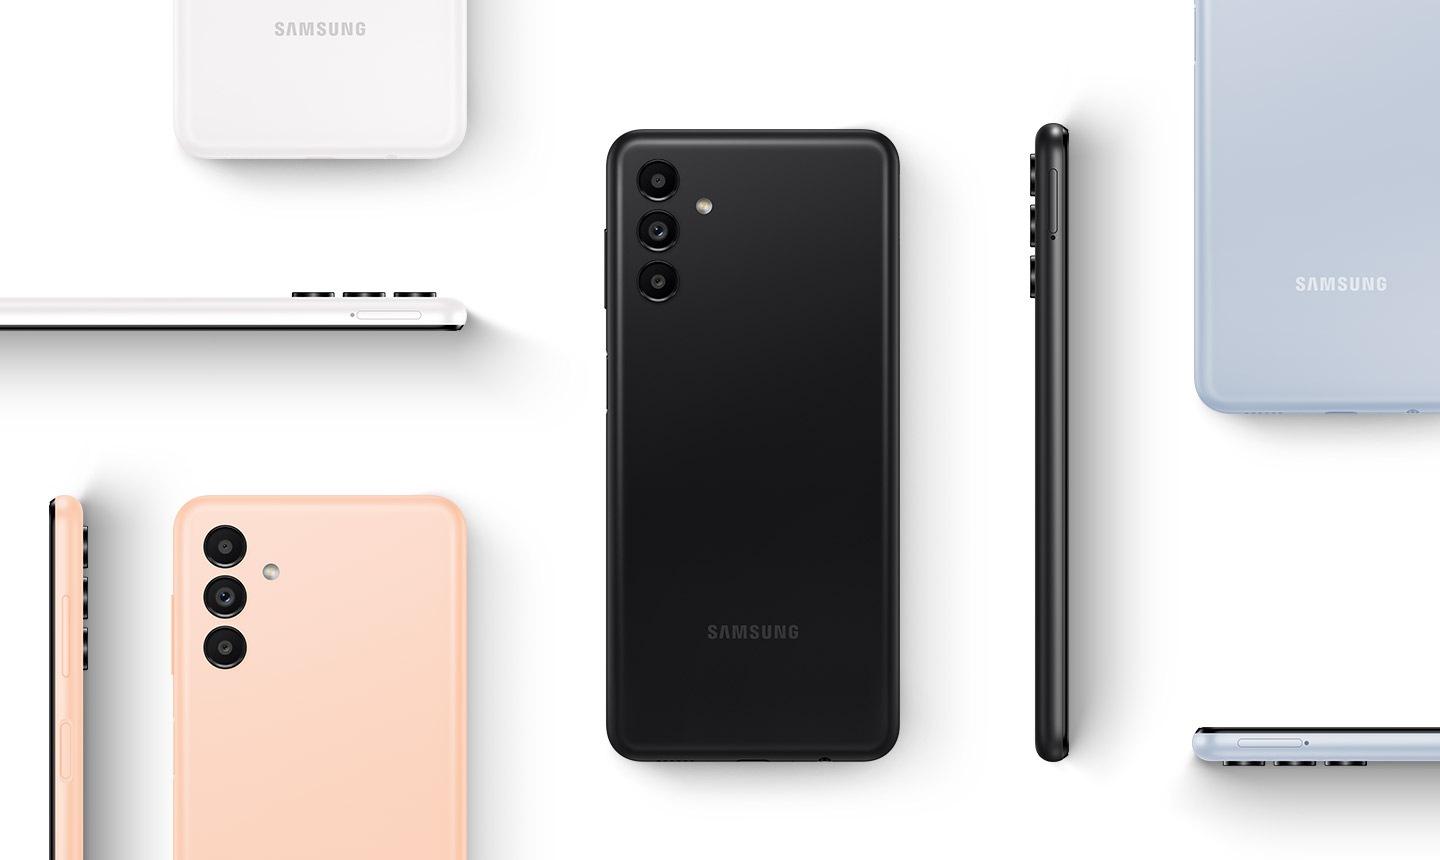 Various Galaxy A13 5G devices are placed in different positions to show the device from the back and the side. The devices are in black, white, light blue and orange copper colorways.